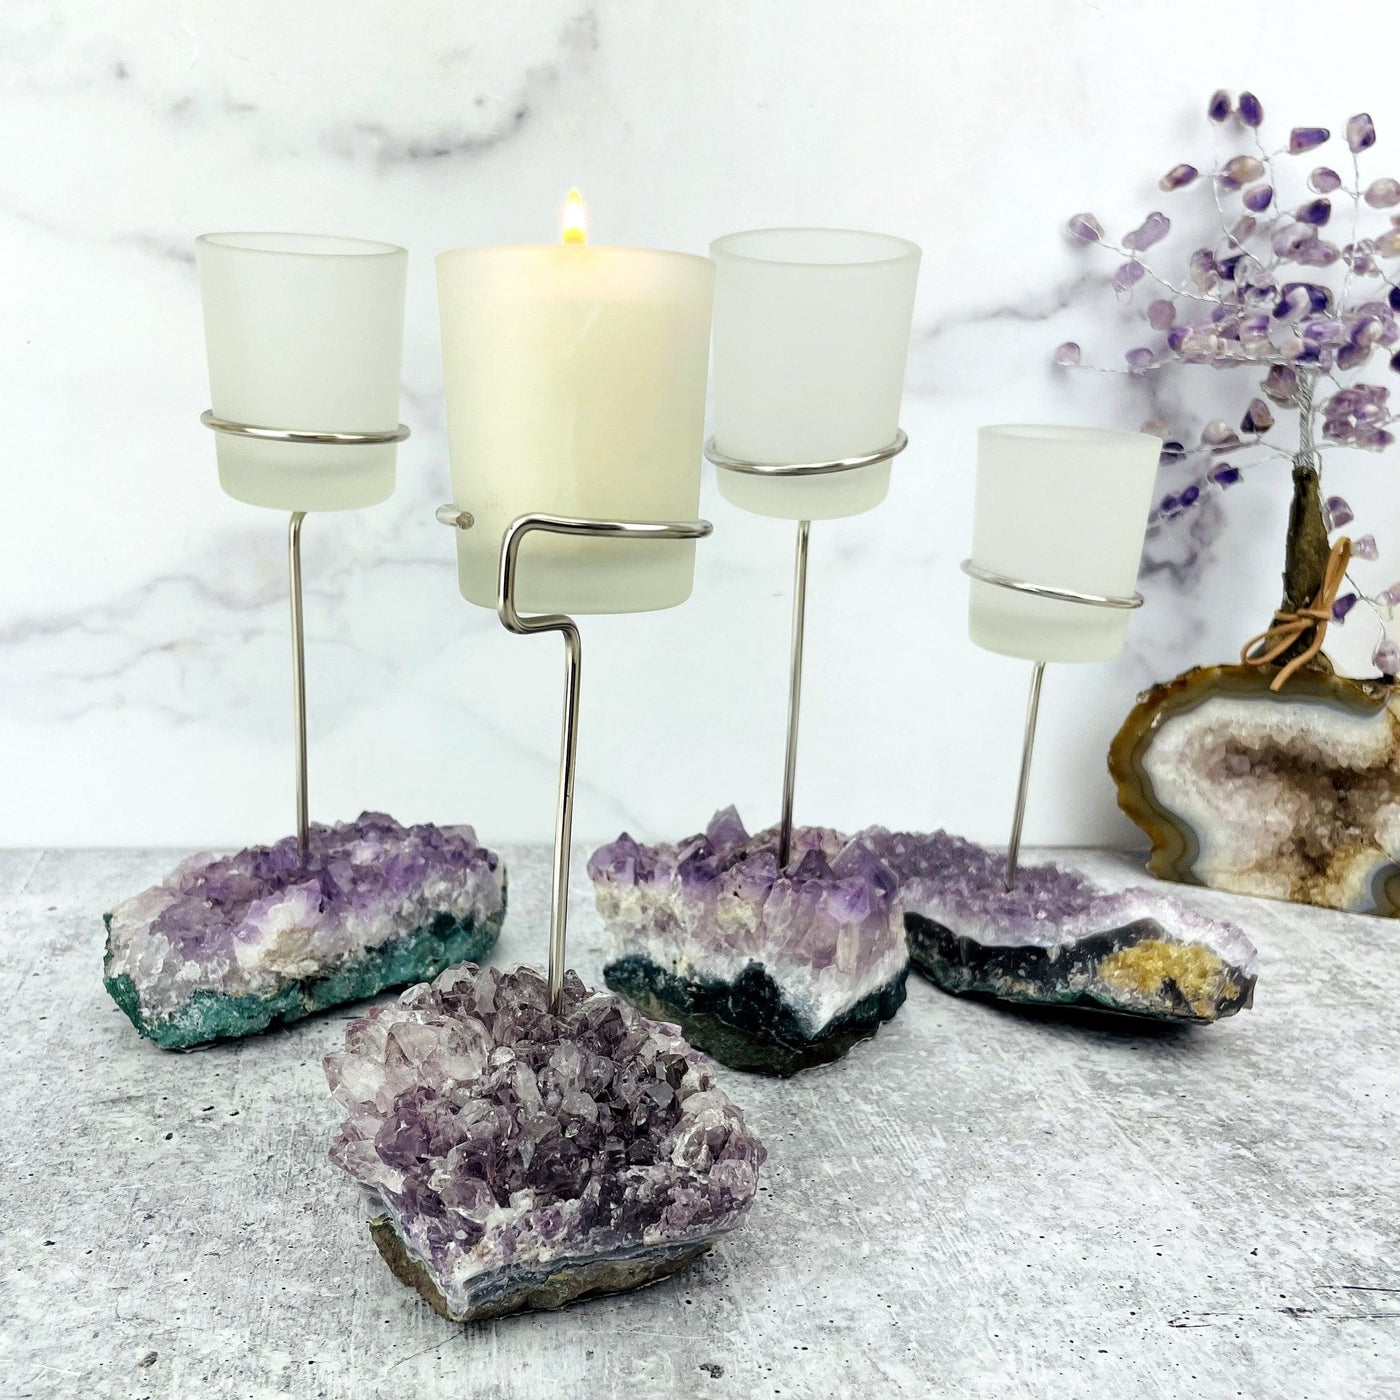 Picture of 4 amethyst candle holders.